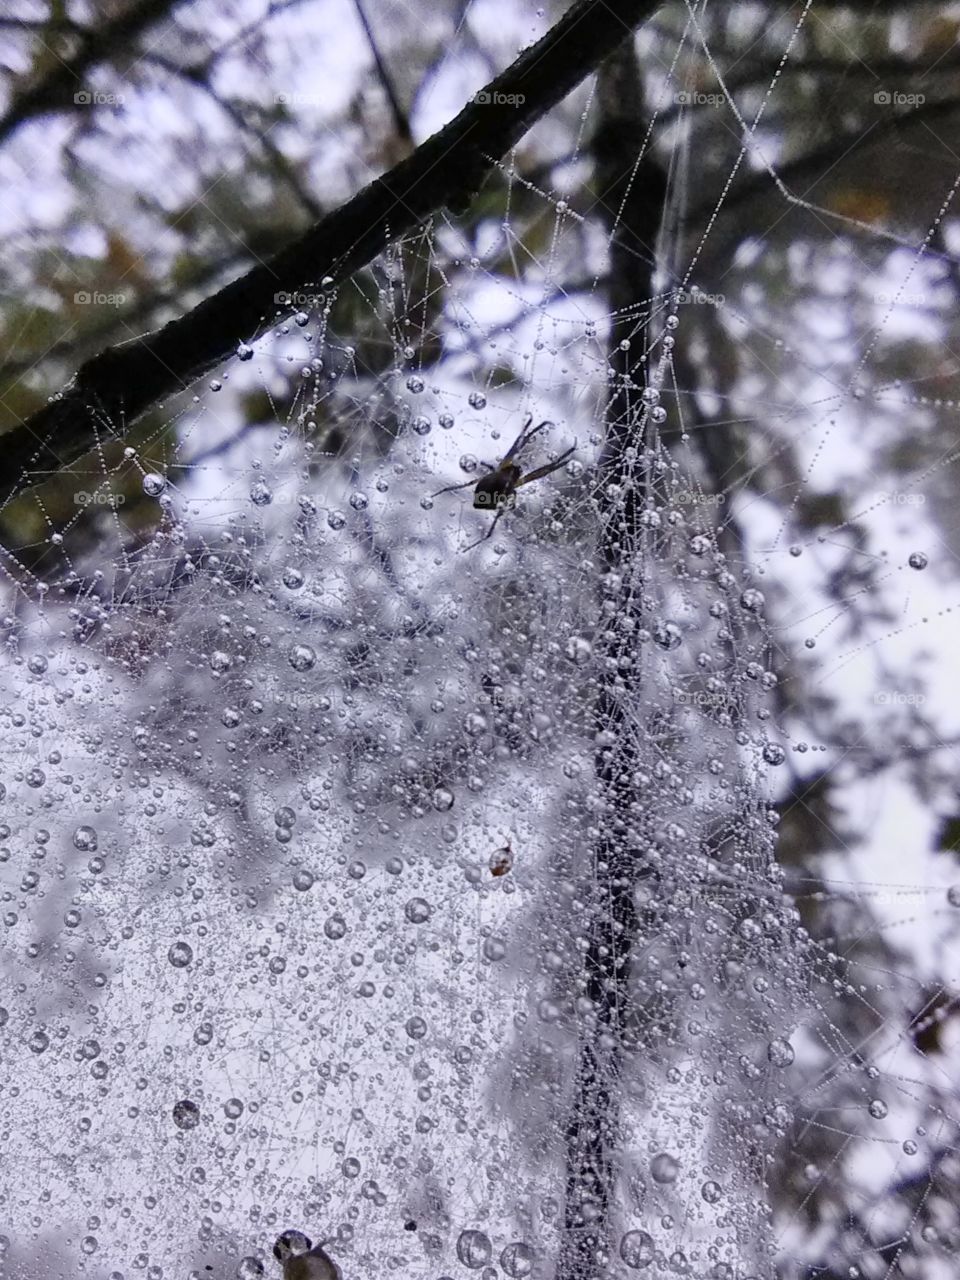 dew drops with spider on web